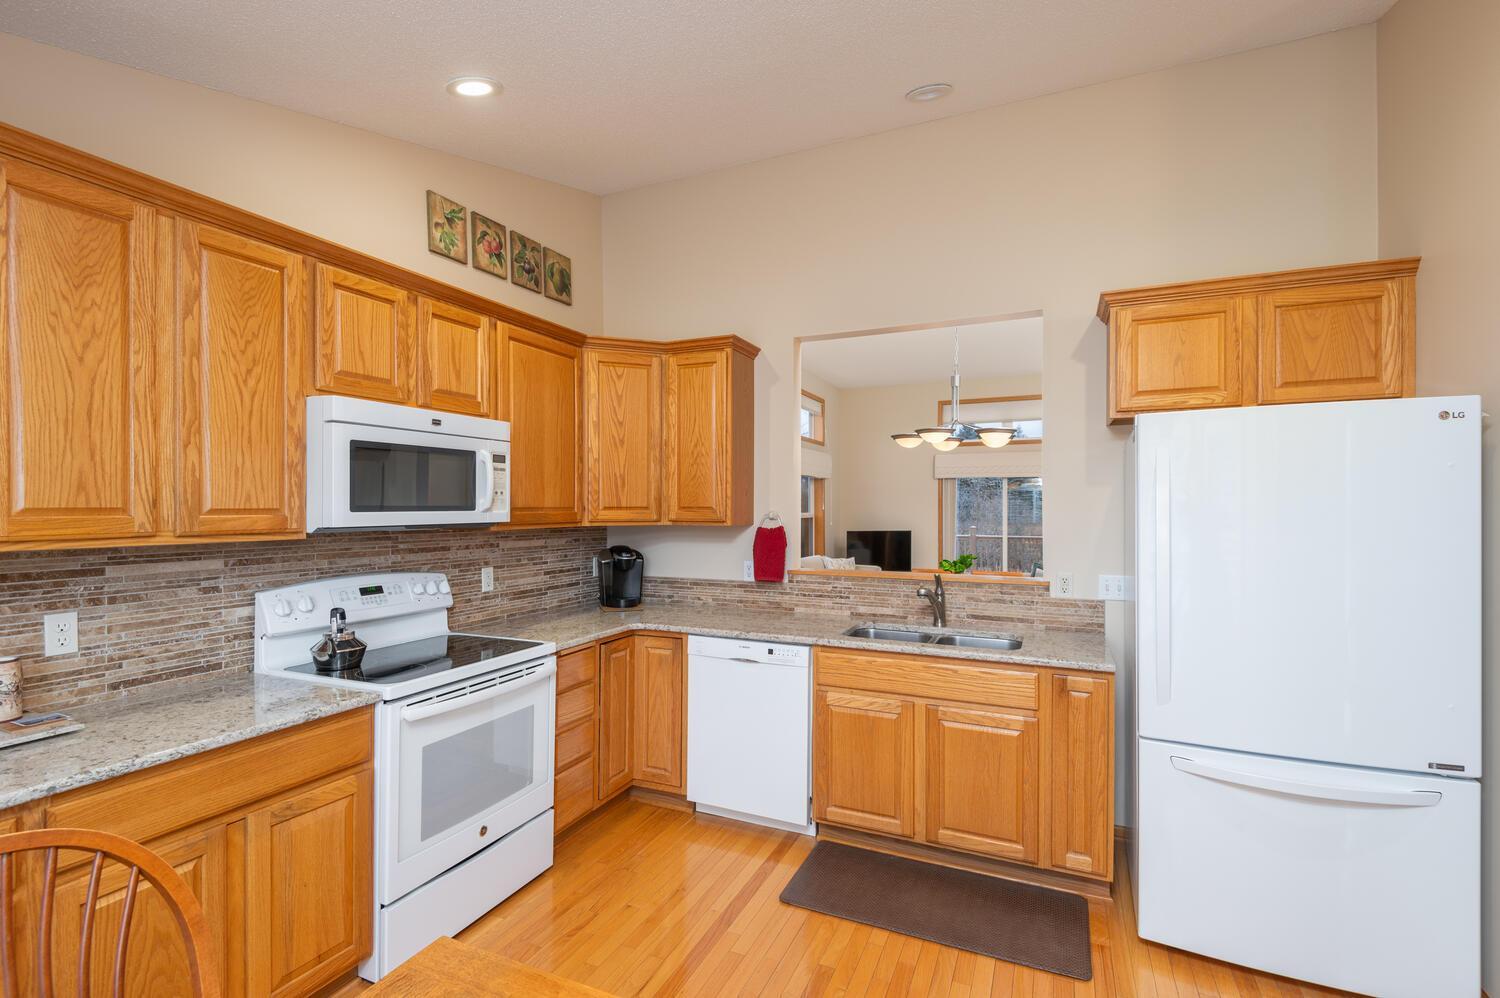 Eat-in kitchen includes newer granite counters and sink with a stone backsplash, updated appliances and pull out shelves for convenience.